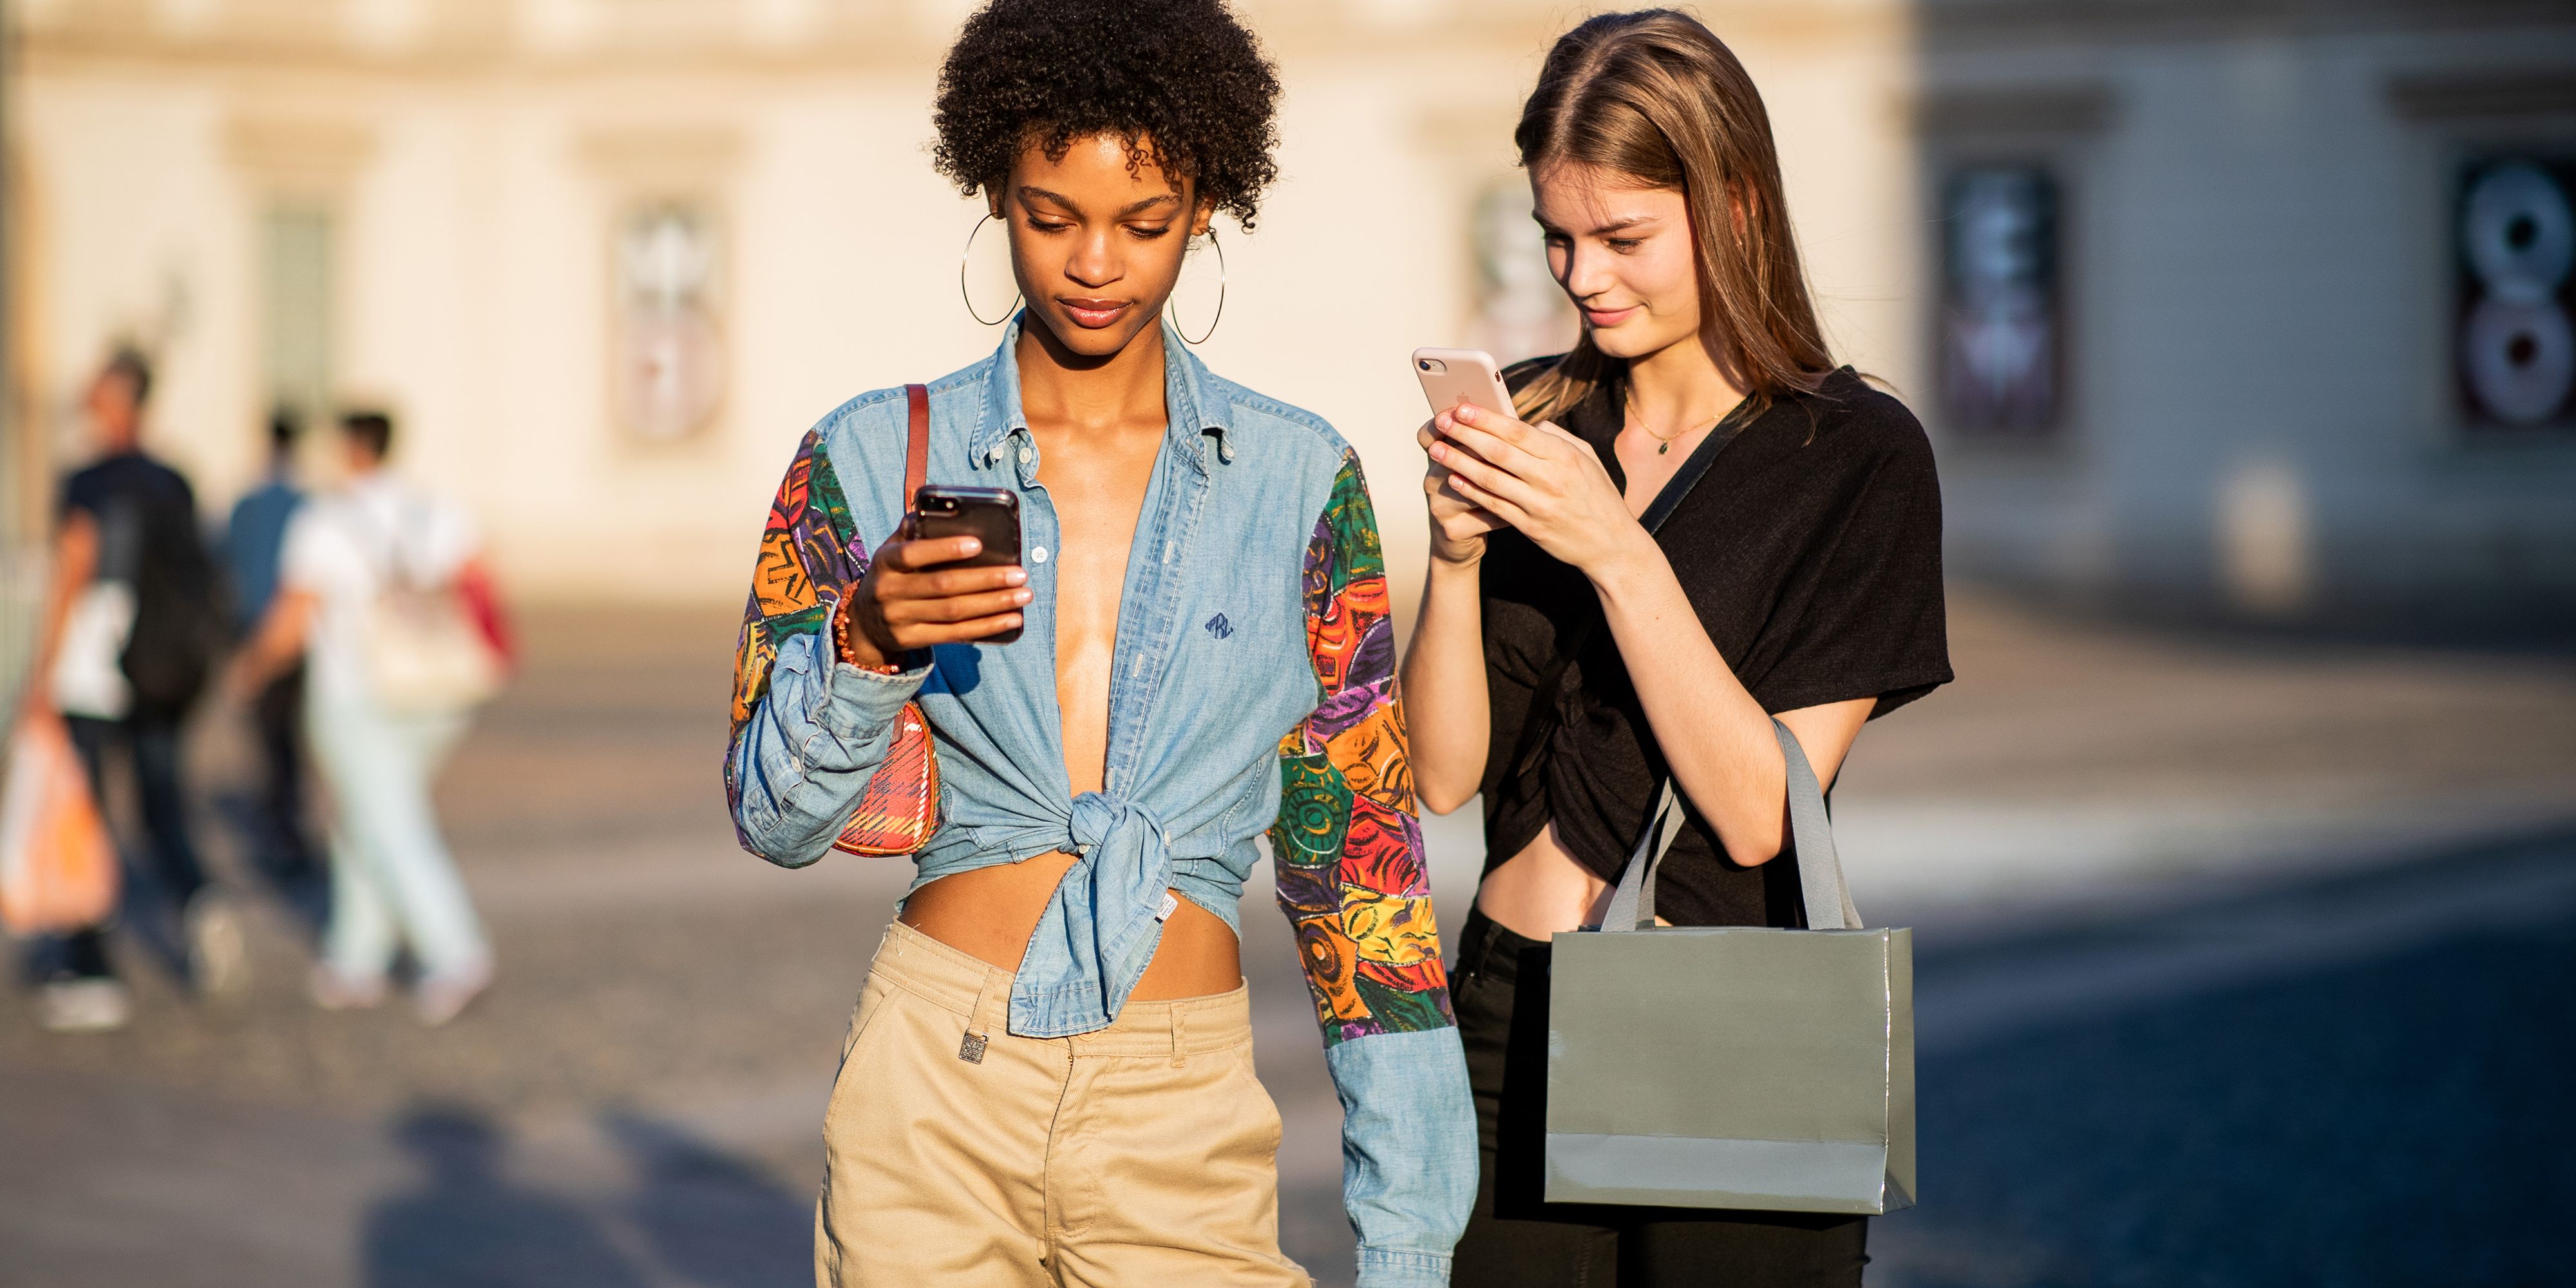 27 Best Shopping Apps 2021 Top Fashion And Home Apps